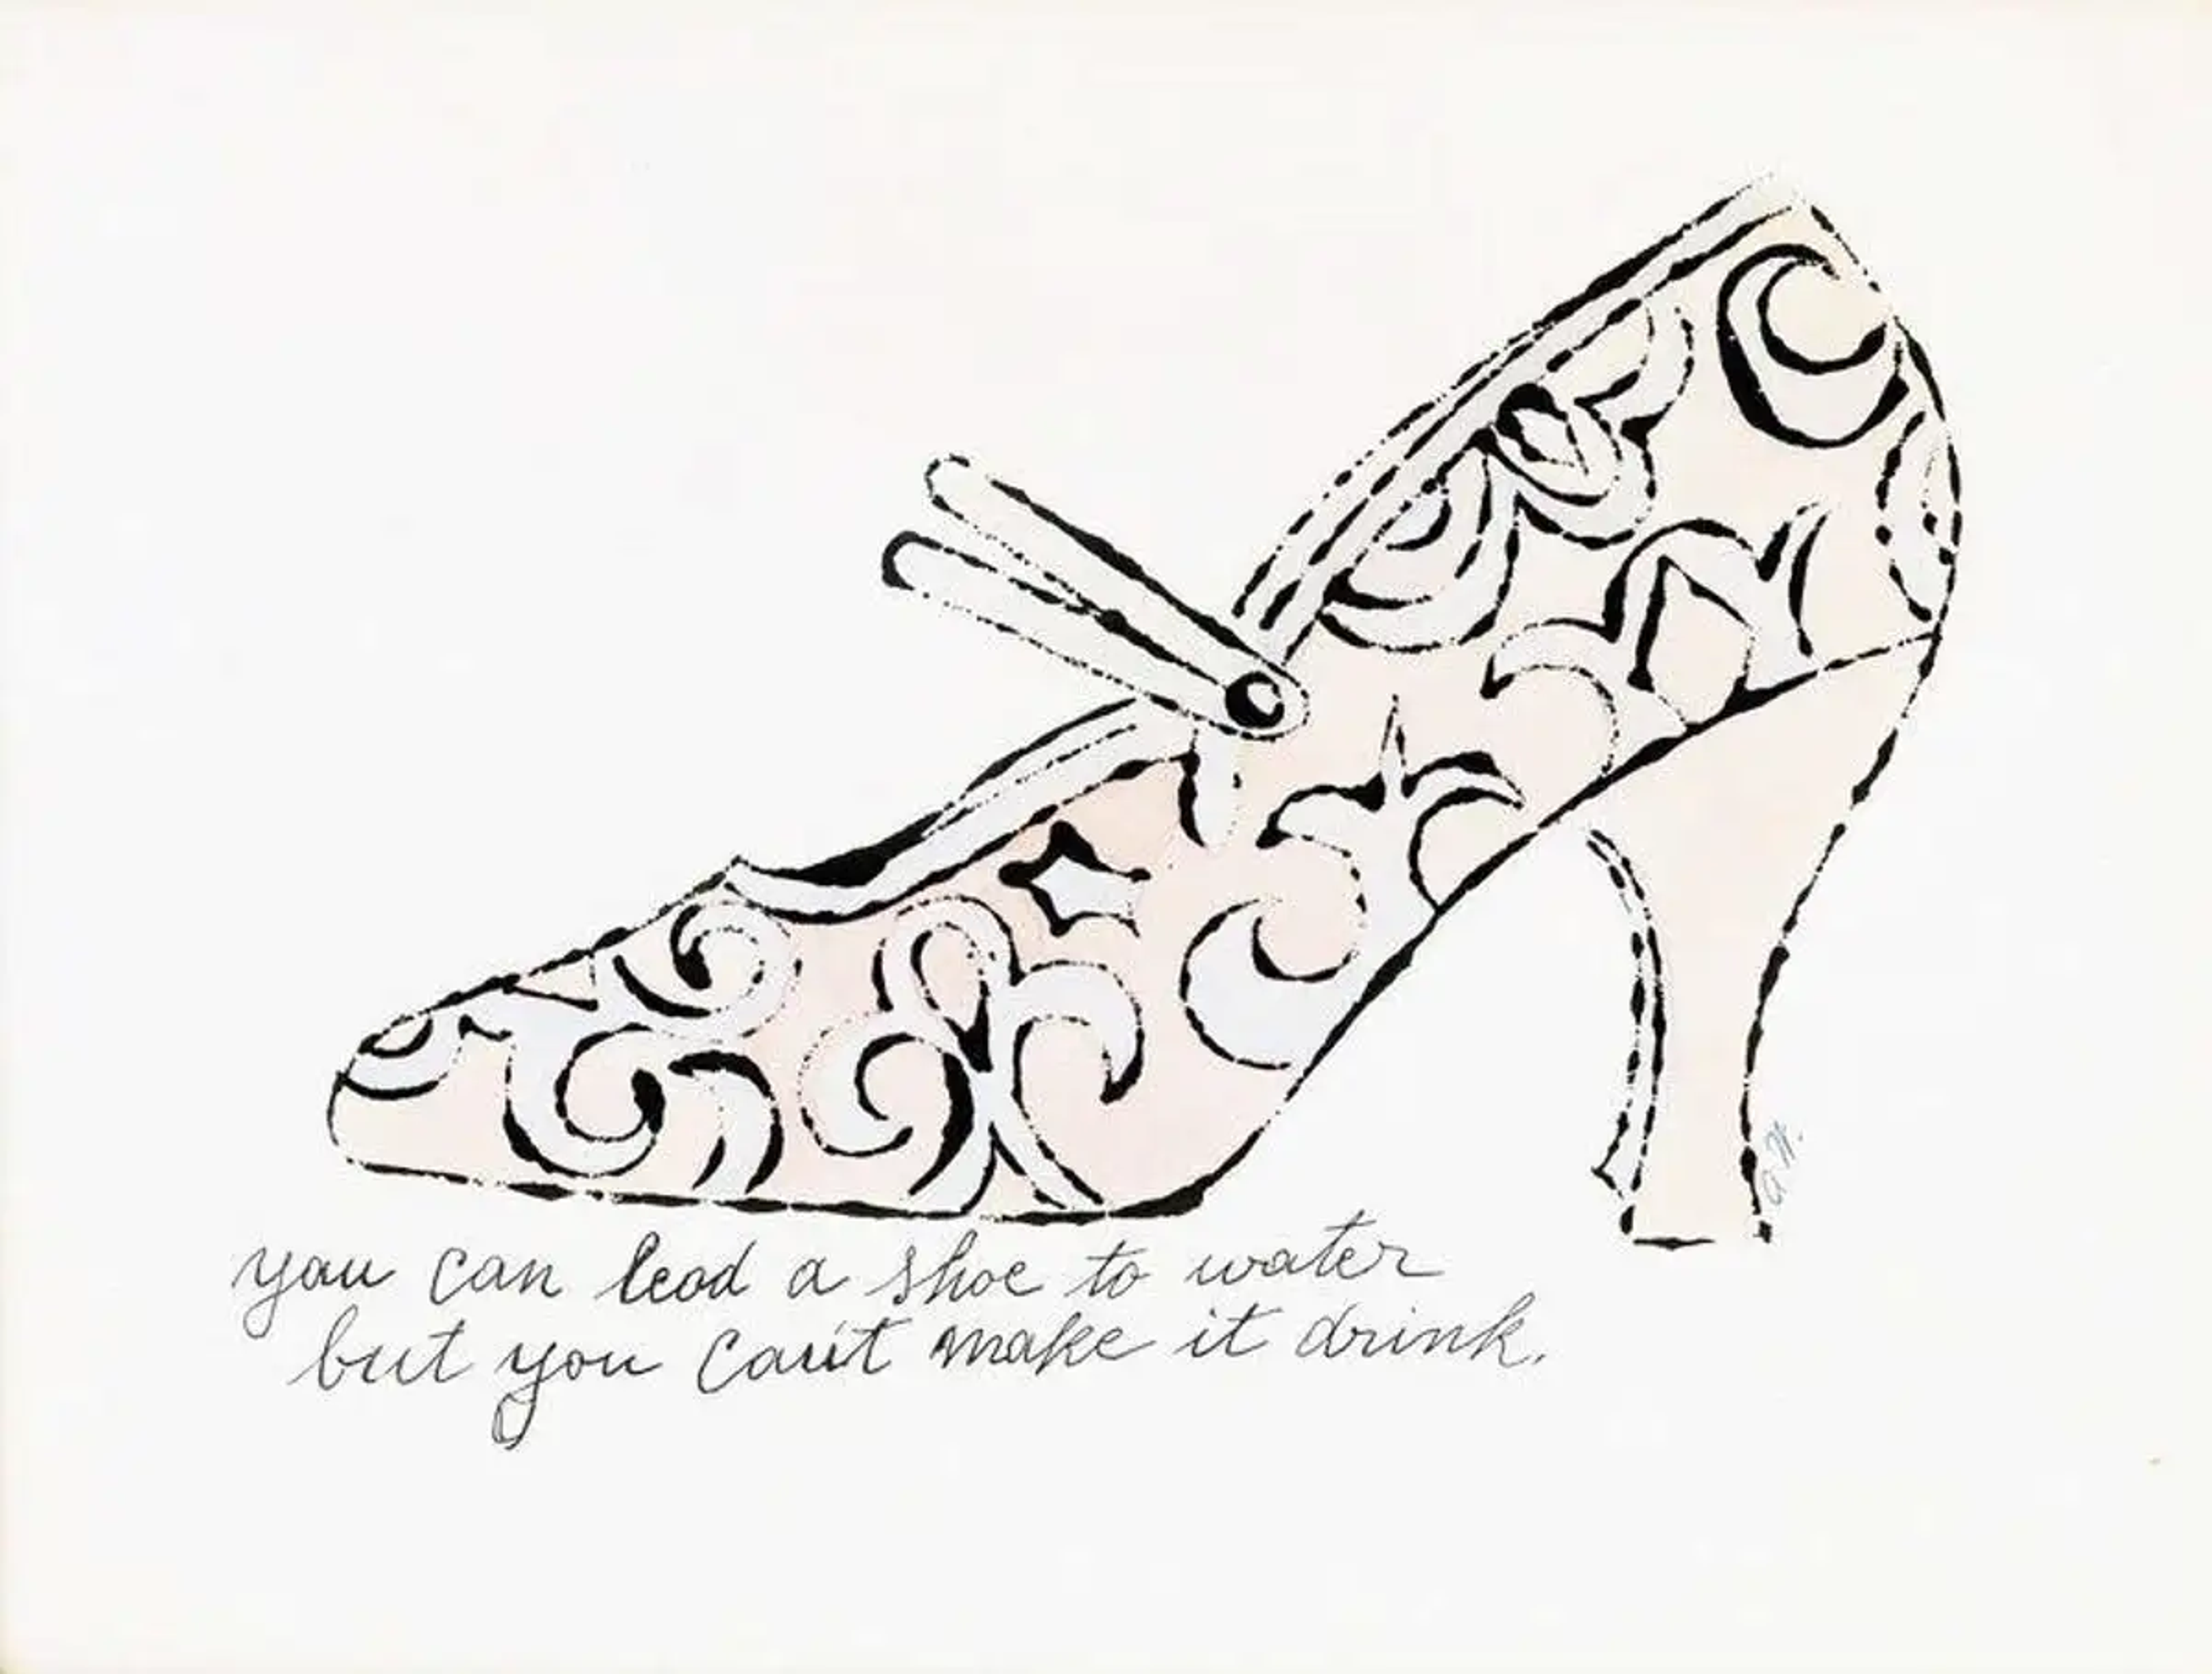 The print shows a peachy pink high, with white paisley designs adorning the upper part, and a double strap crossing the top. Beneath the shoe, the altered saying “you can lead a shoe to water but you can’t make it drink.” has been inscribed in a lower-case cursive hand. The same hand has initialed “a.w.” on the outside of the heel.